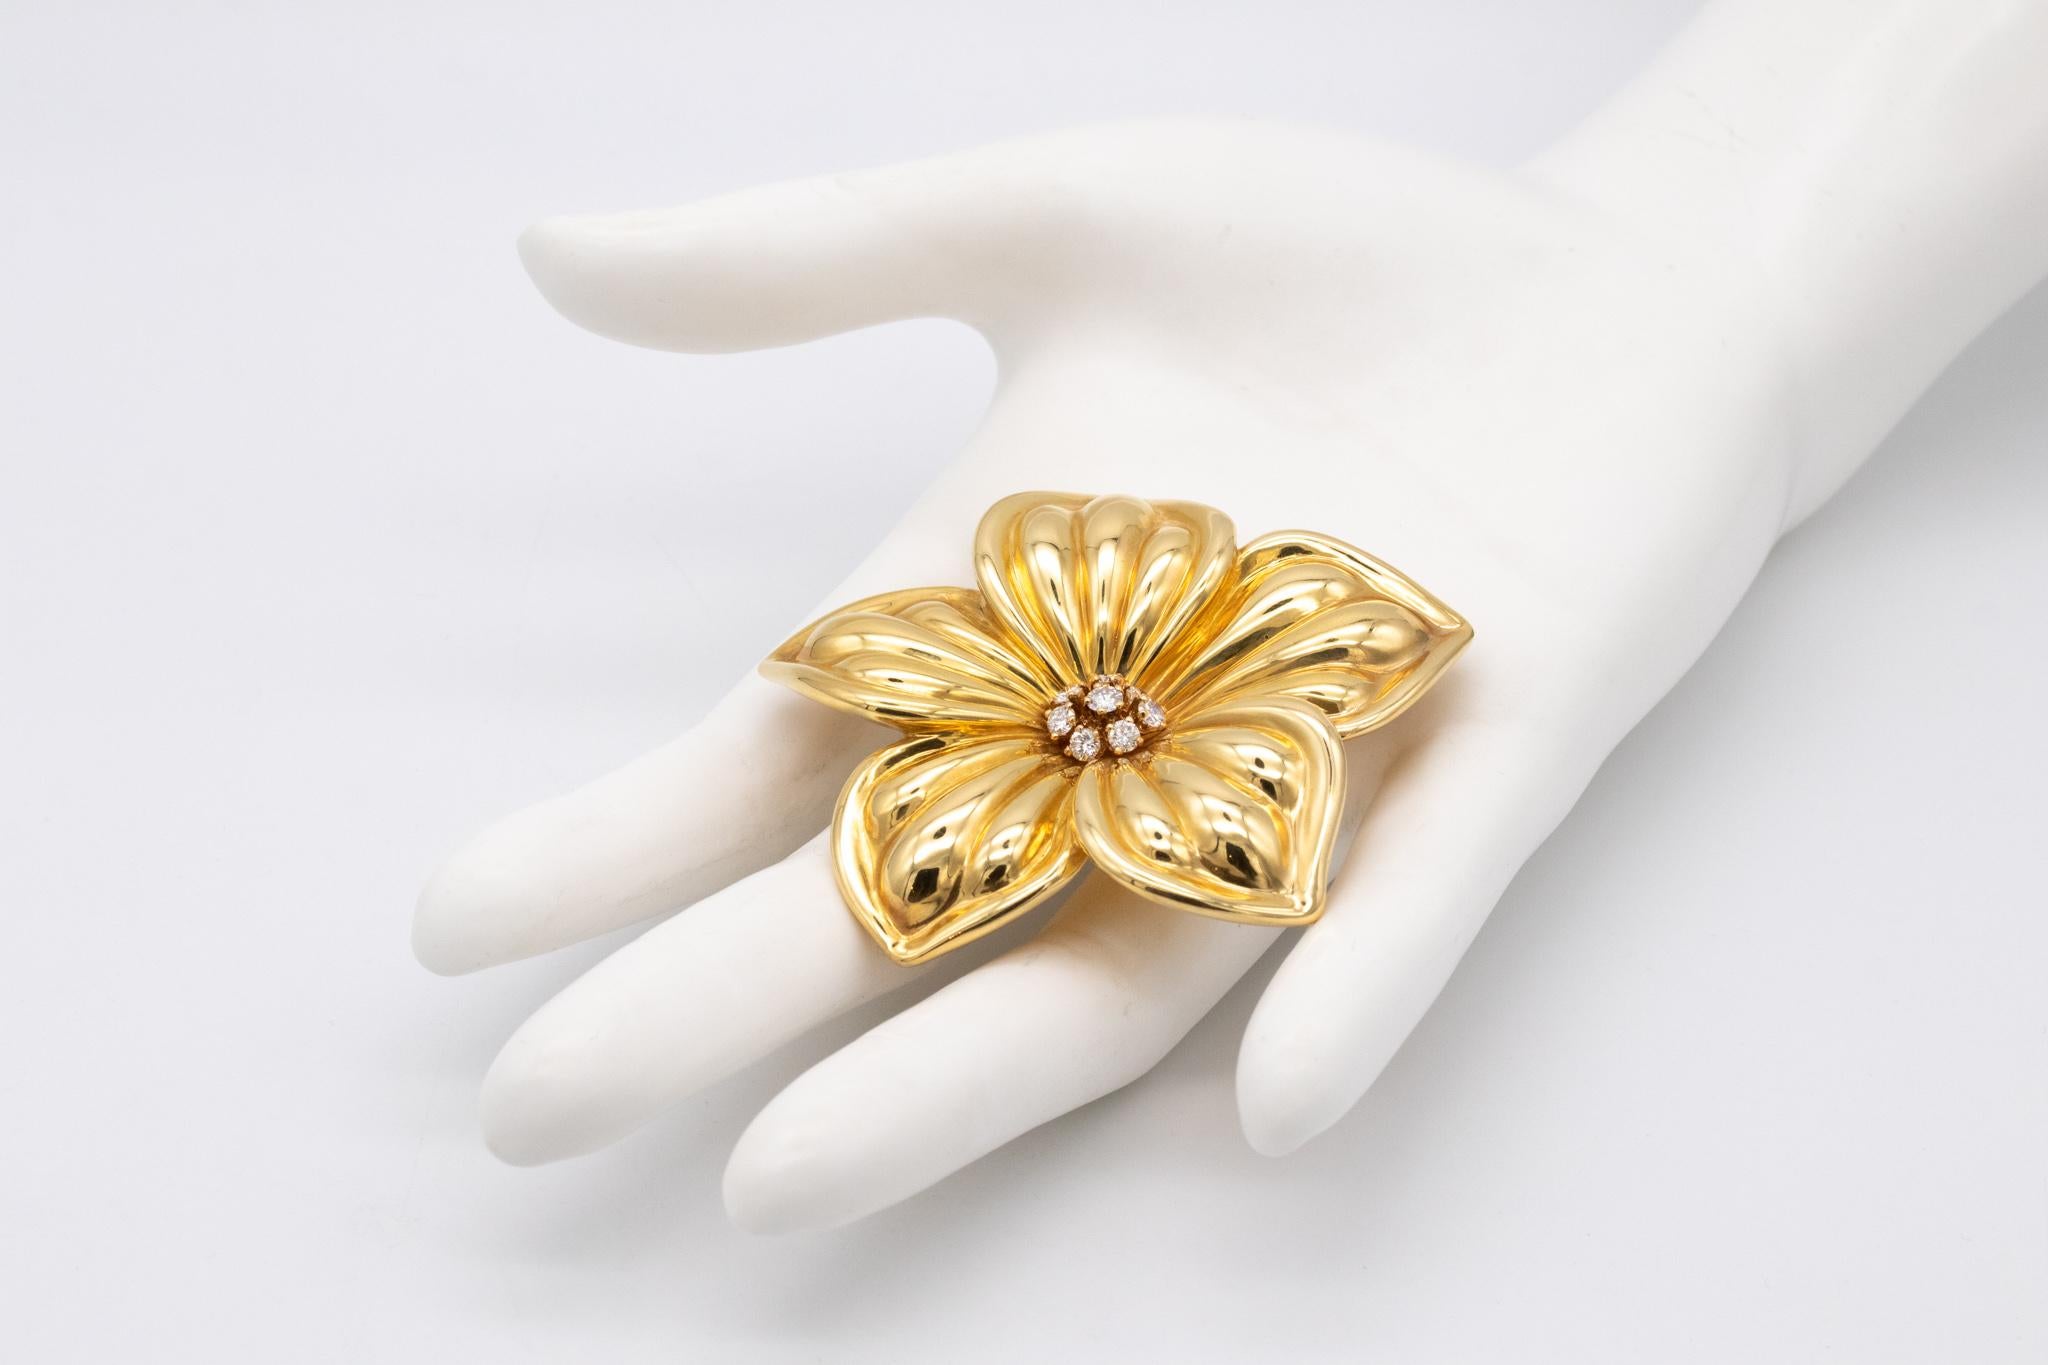 Beautiful brooch designed by Van Cleef & Arpels. 

Very chic Rose de Noel flower brooch with diamonds. Crafted in France in solid yellow gold of 18 karats and finished with very high polish. Is suited at the reverse, with a hinged pin bar and a